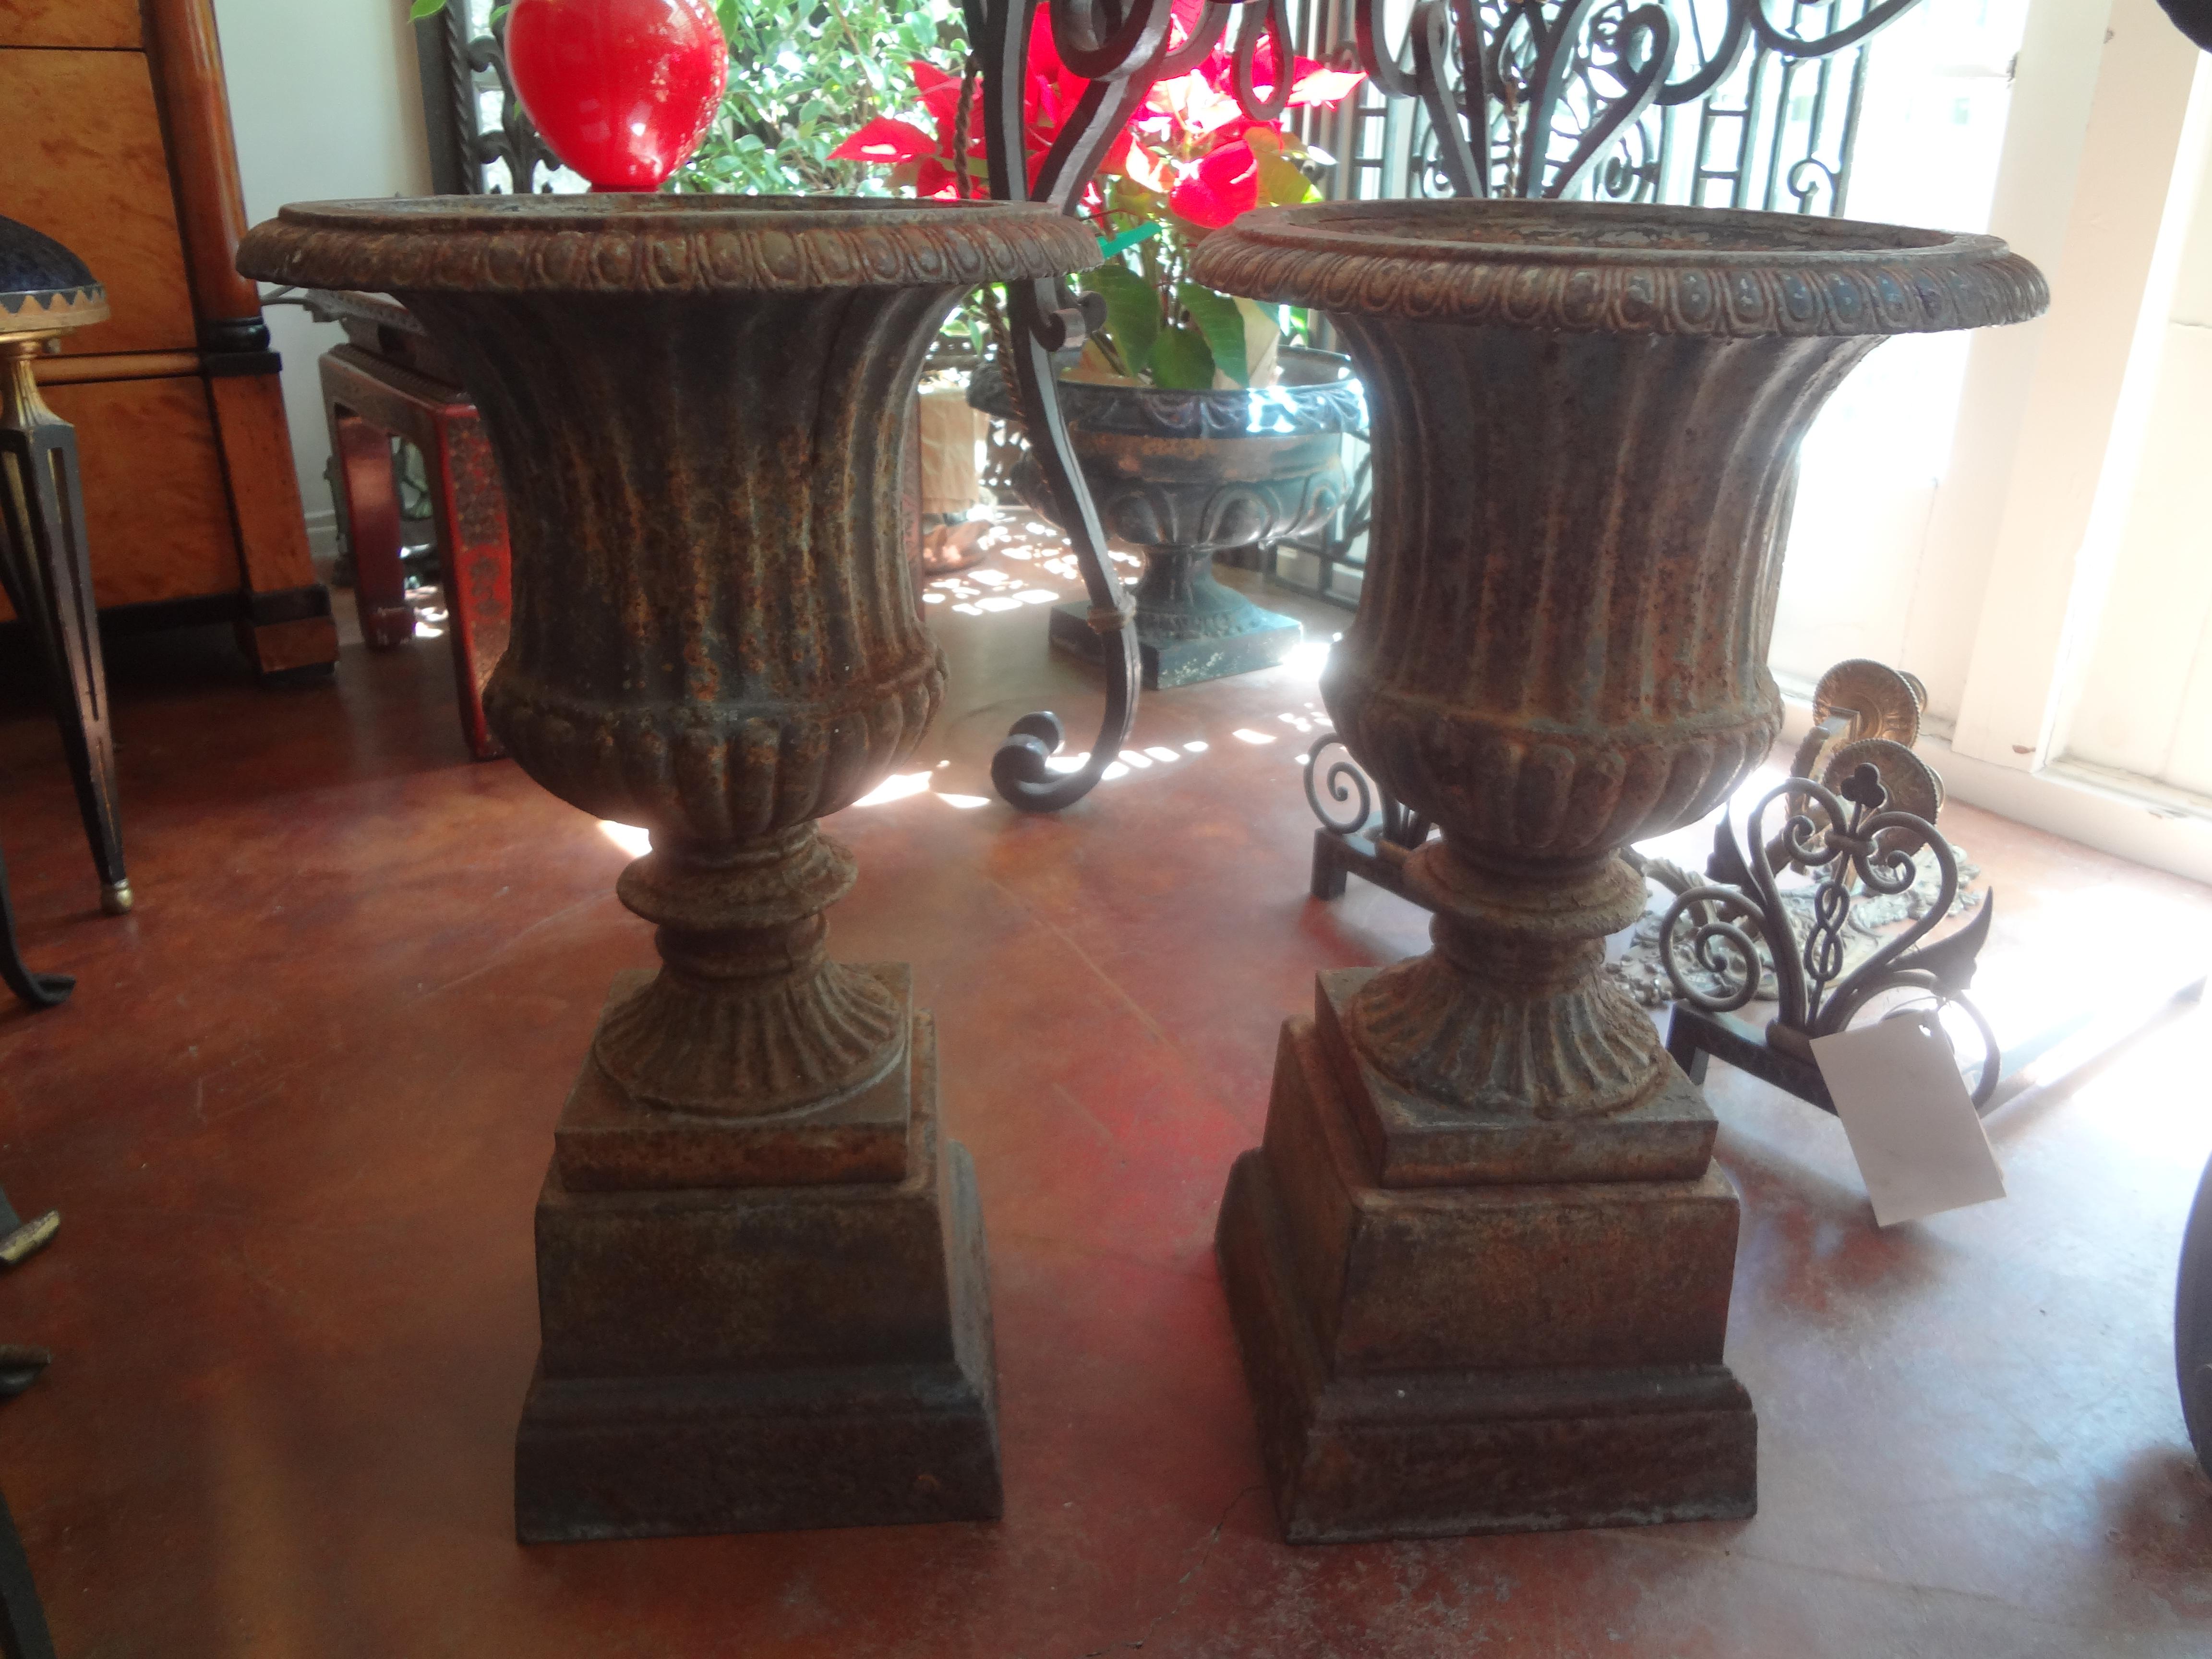 Pair of 19th century French Neoclassical style iron garden urns on plinths. These beautiful French cast iron campana garden urns, planters or jardinieres can be used indoors or outdoors.
Great condition.
Dimensions:
Urns-14 inches H
 11.25 inches